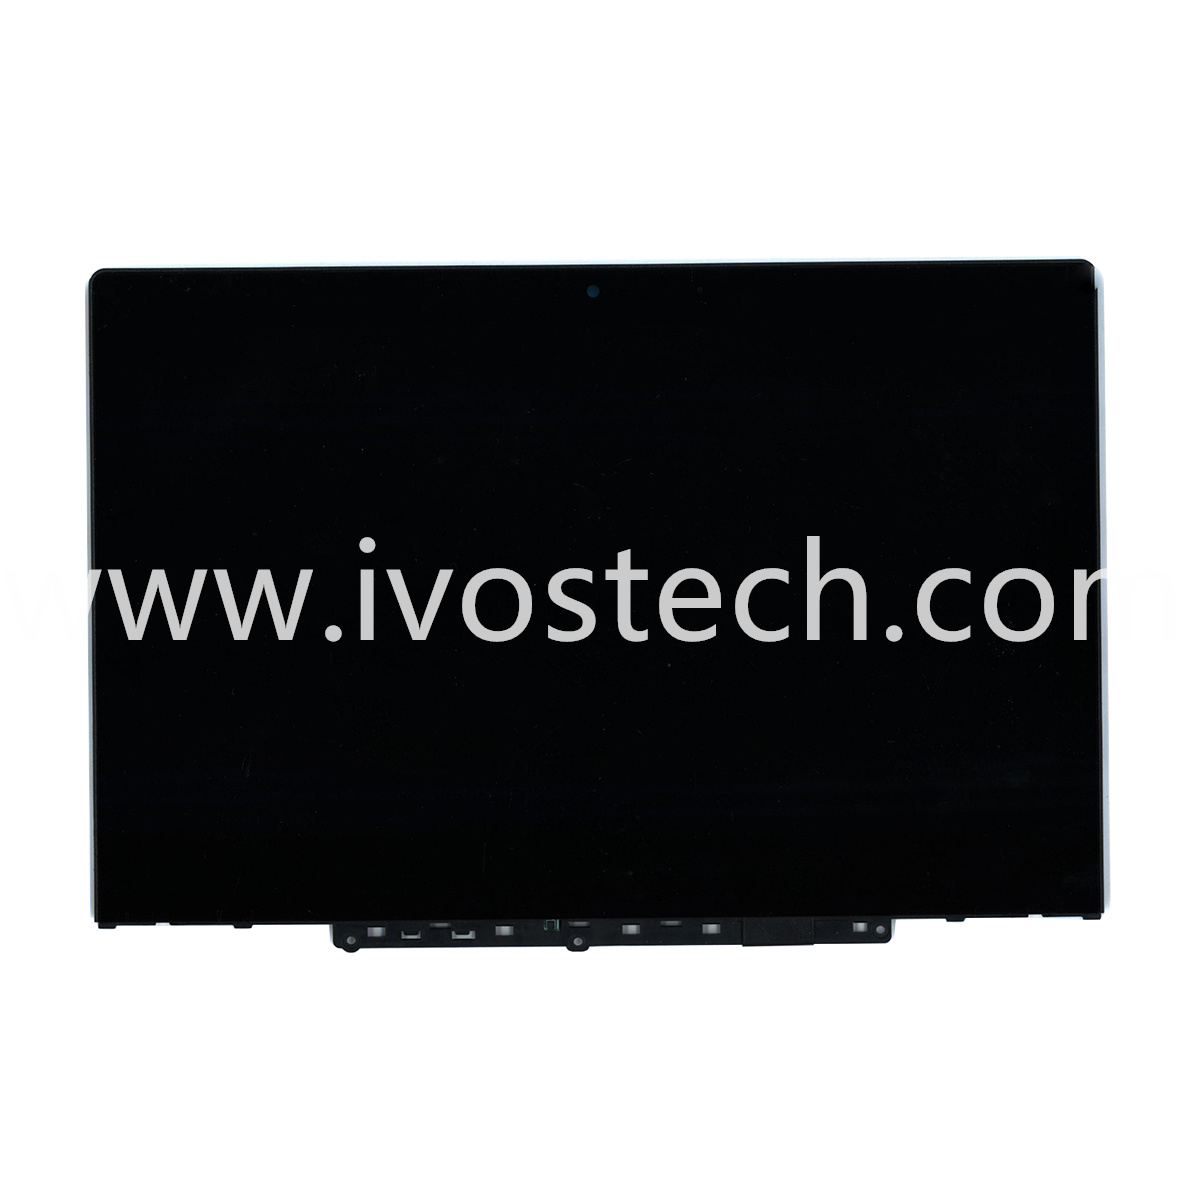 5D10Y97713 11.6” HD Laptop LCD Touch Screen Display with Bezel Assembly for Lenovo Chromebook 11 300e 2nd Gen AST 82CE